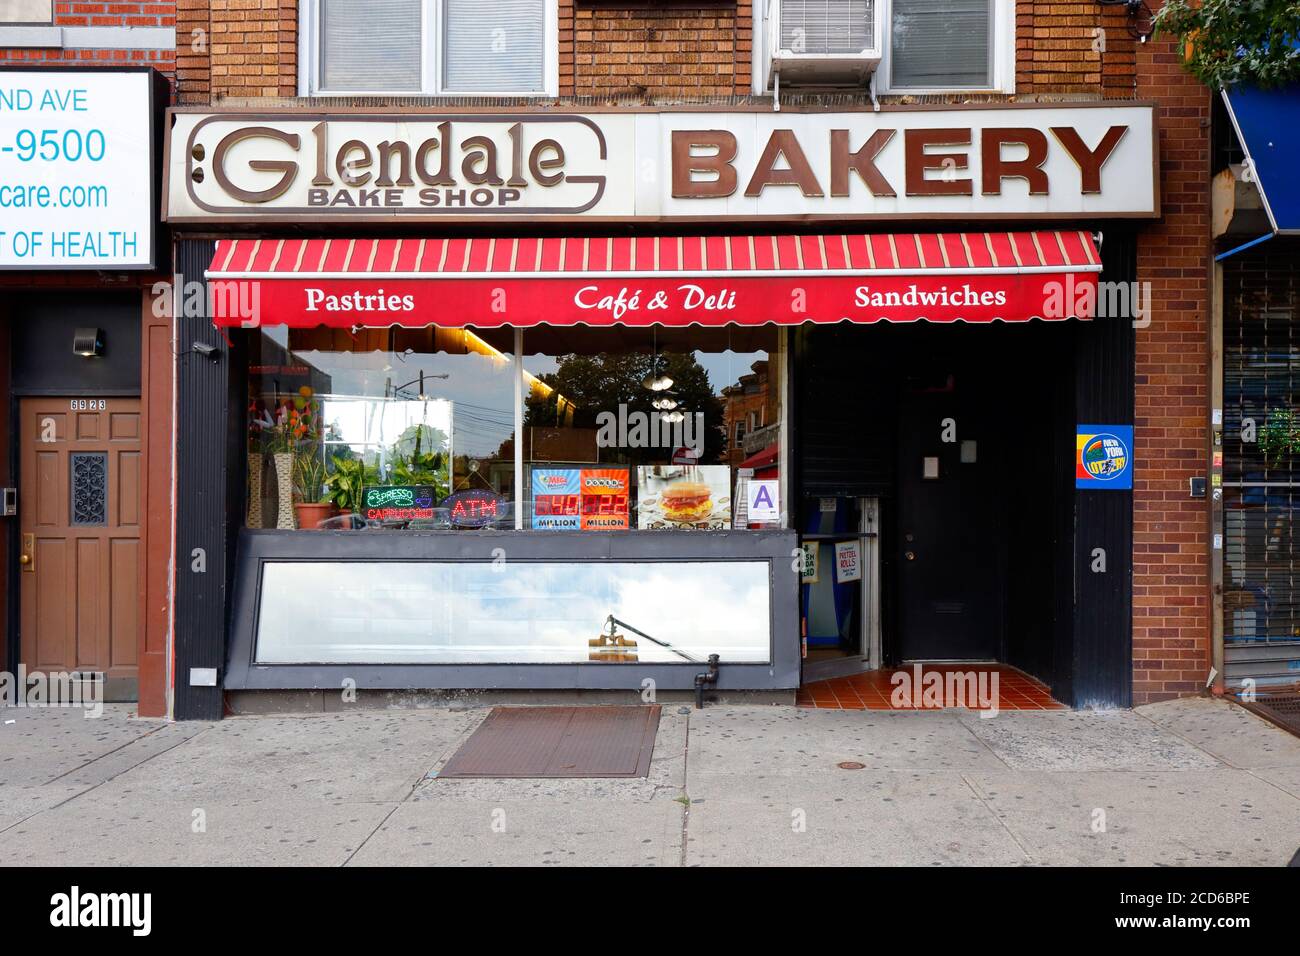 Glendale Bake Shop, 6925 Grand Ave, Queens, New York. NYC storefront photo of a bakery in the Maspeth neighborhood. Stock Photo